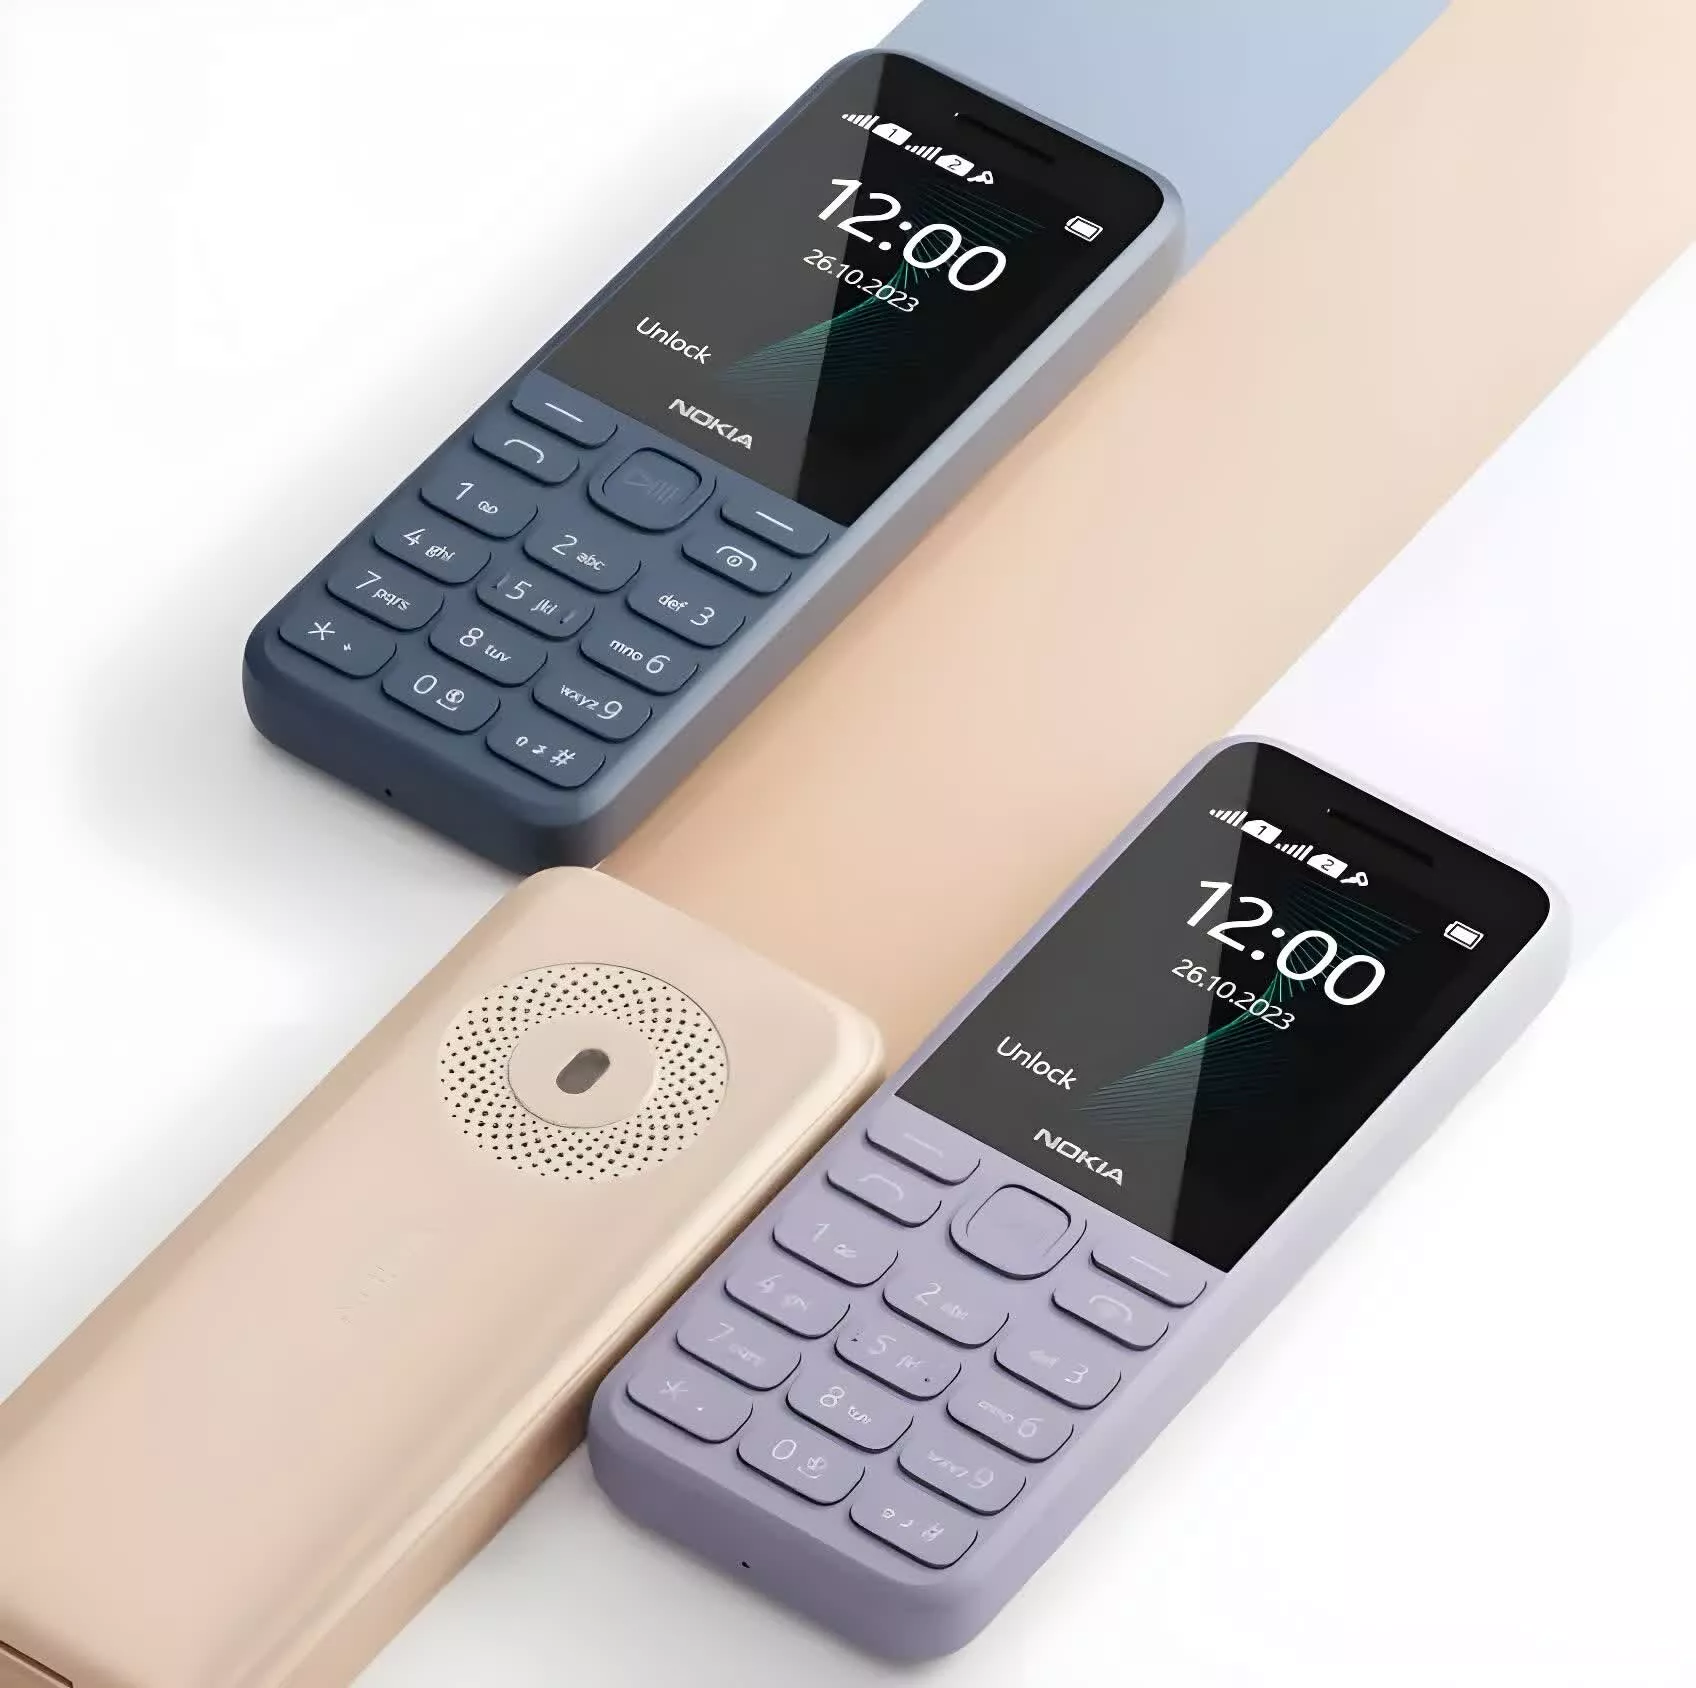 Nokia phone maker HMD Global is launching its own handset brand